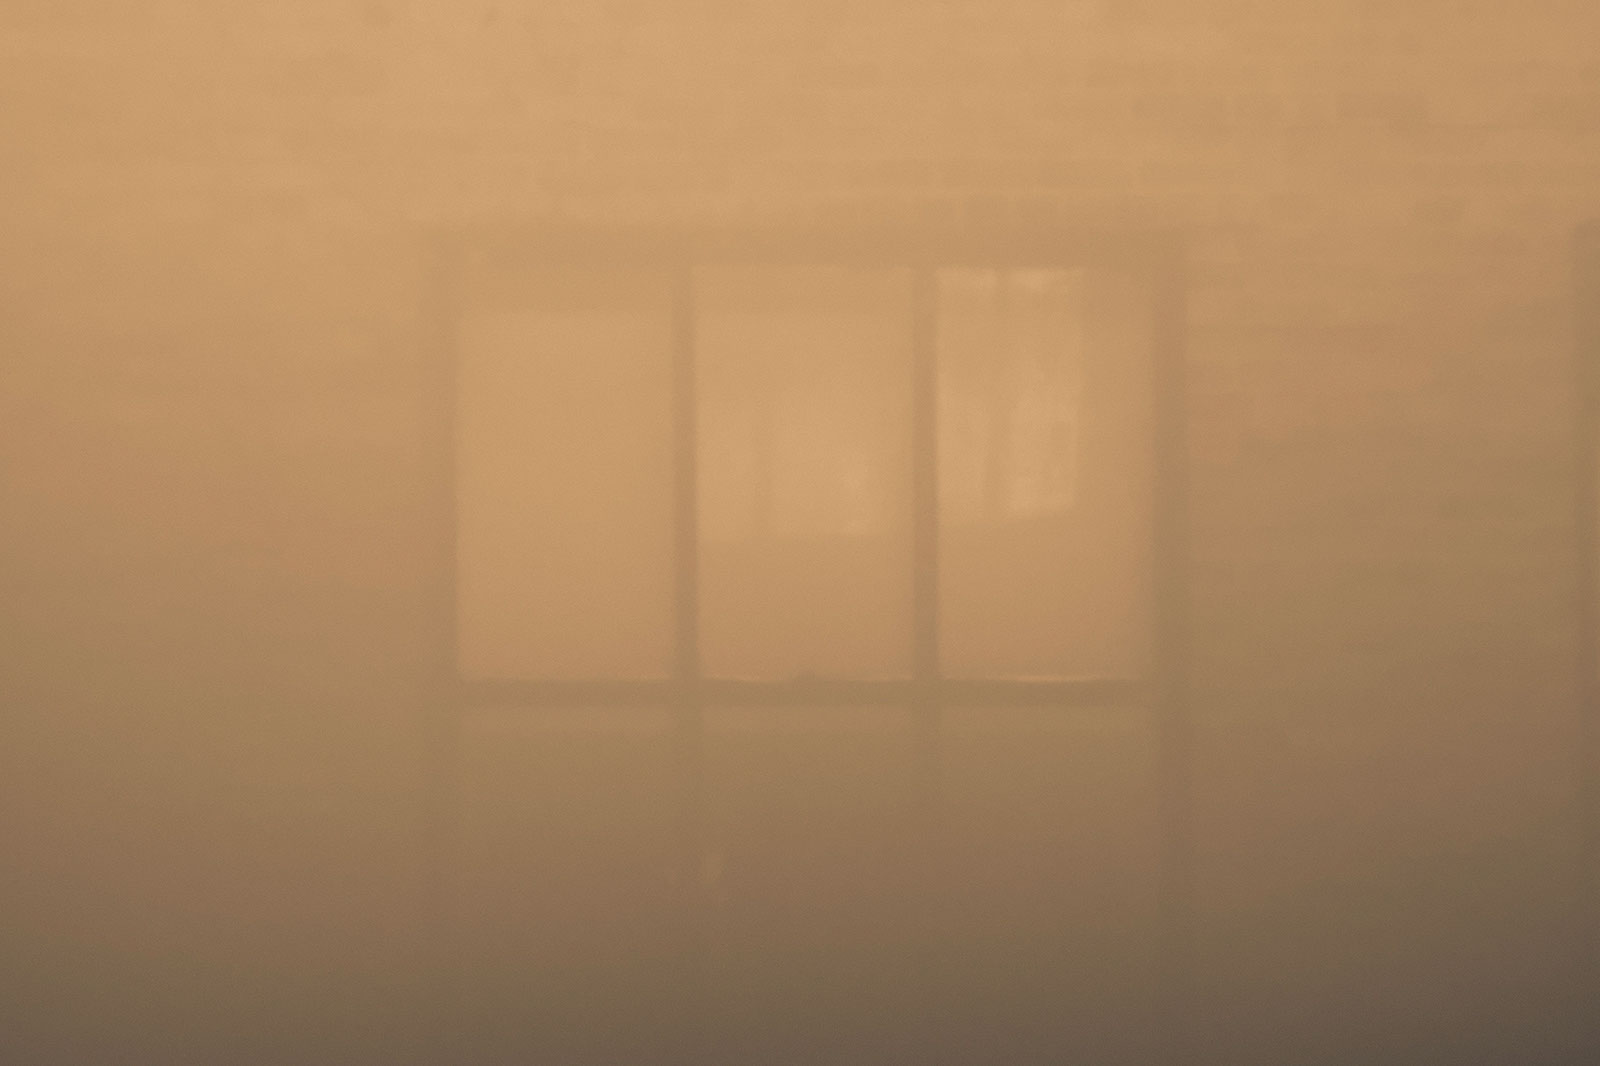 Rooms with/without a view, Februari 2013